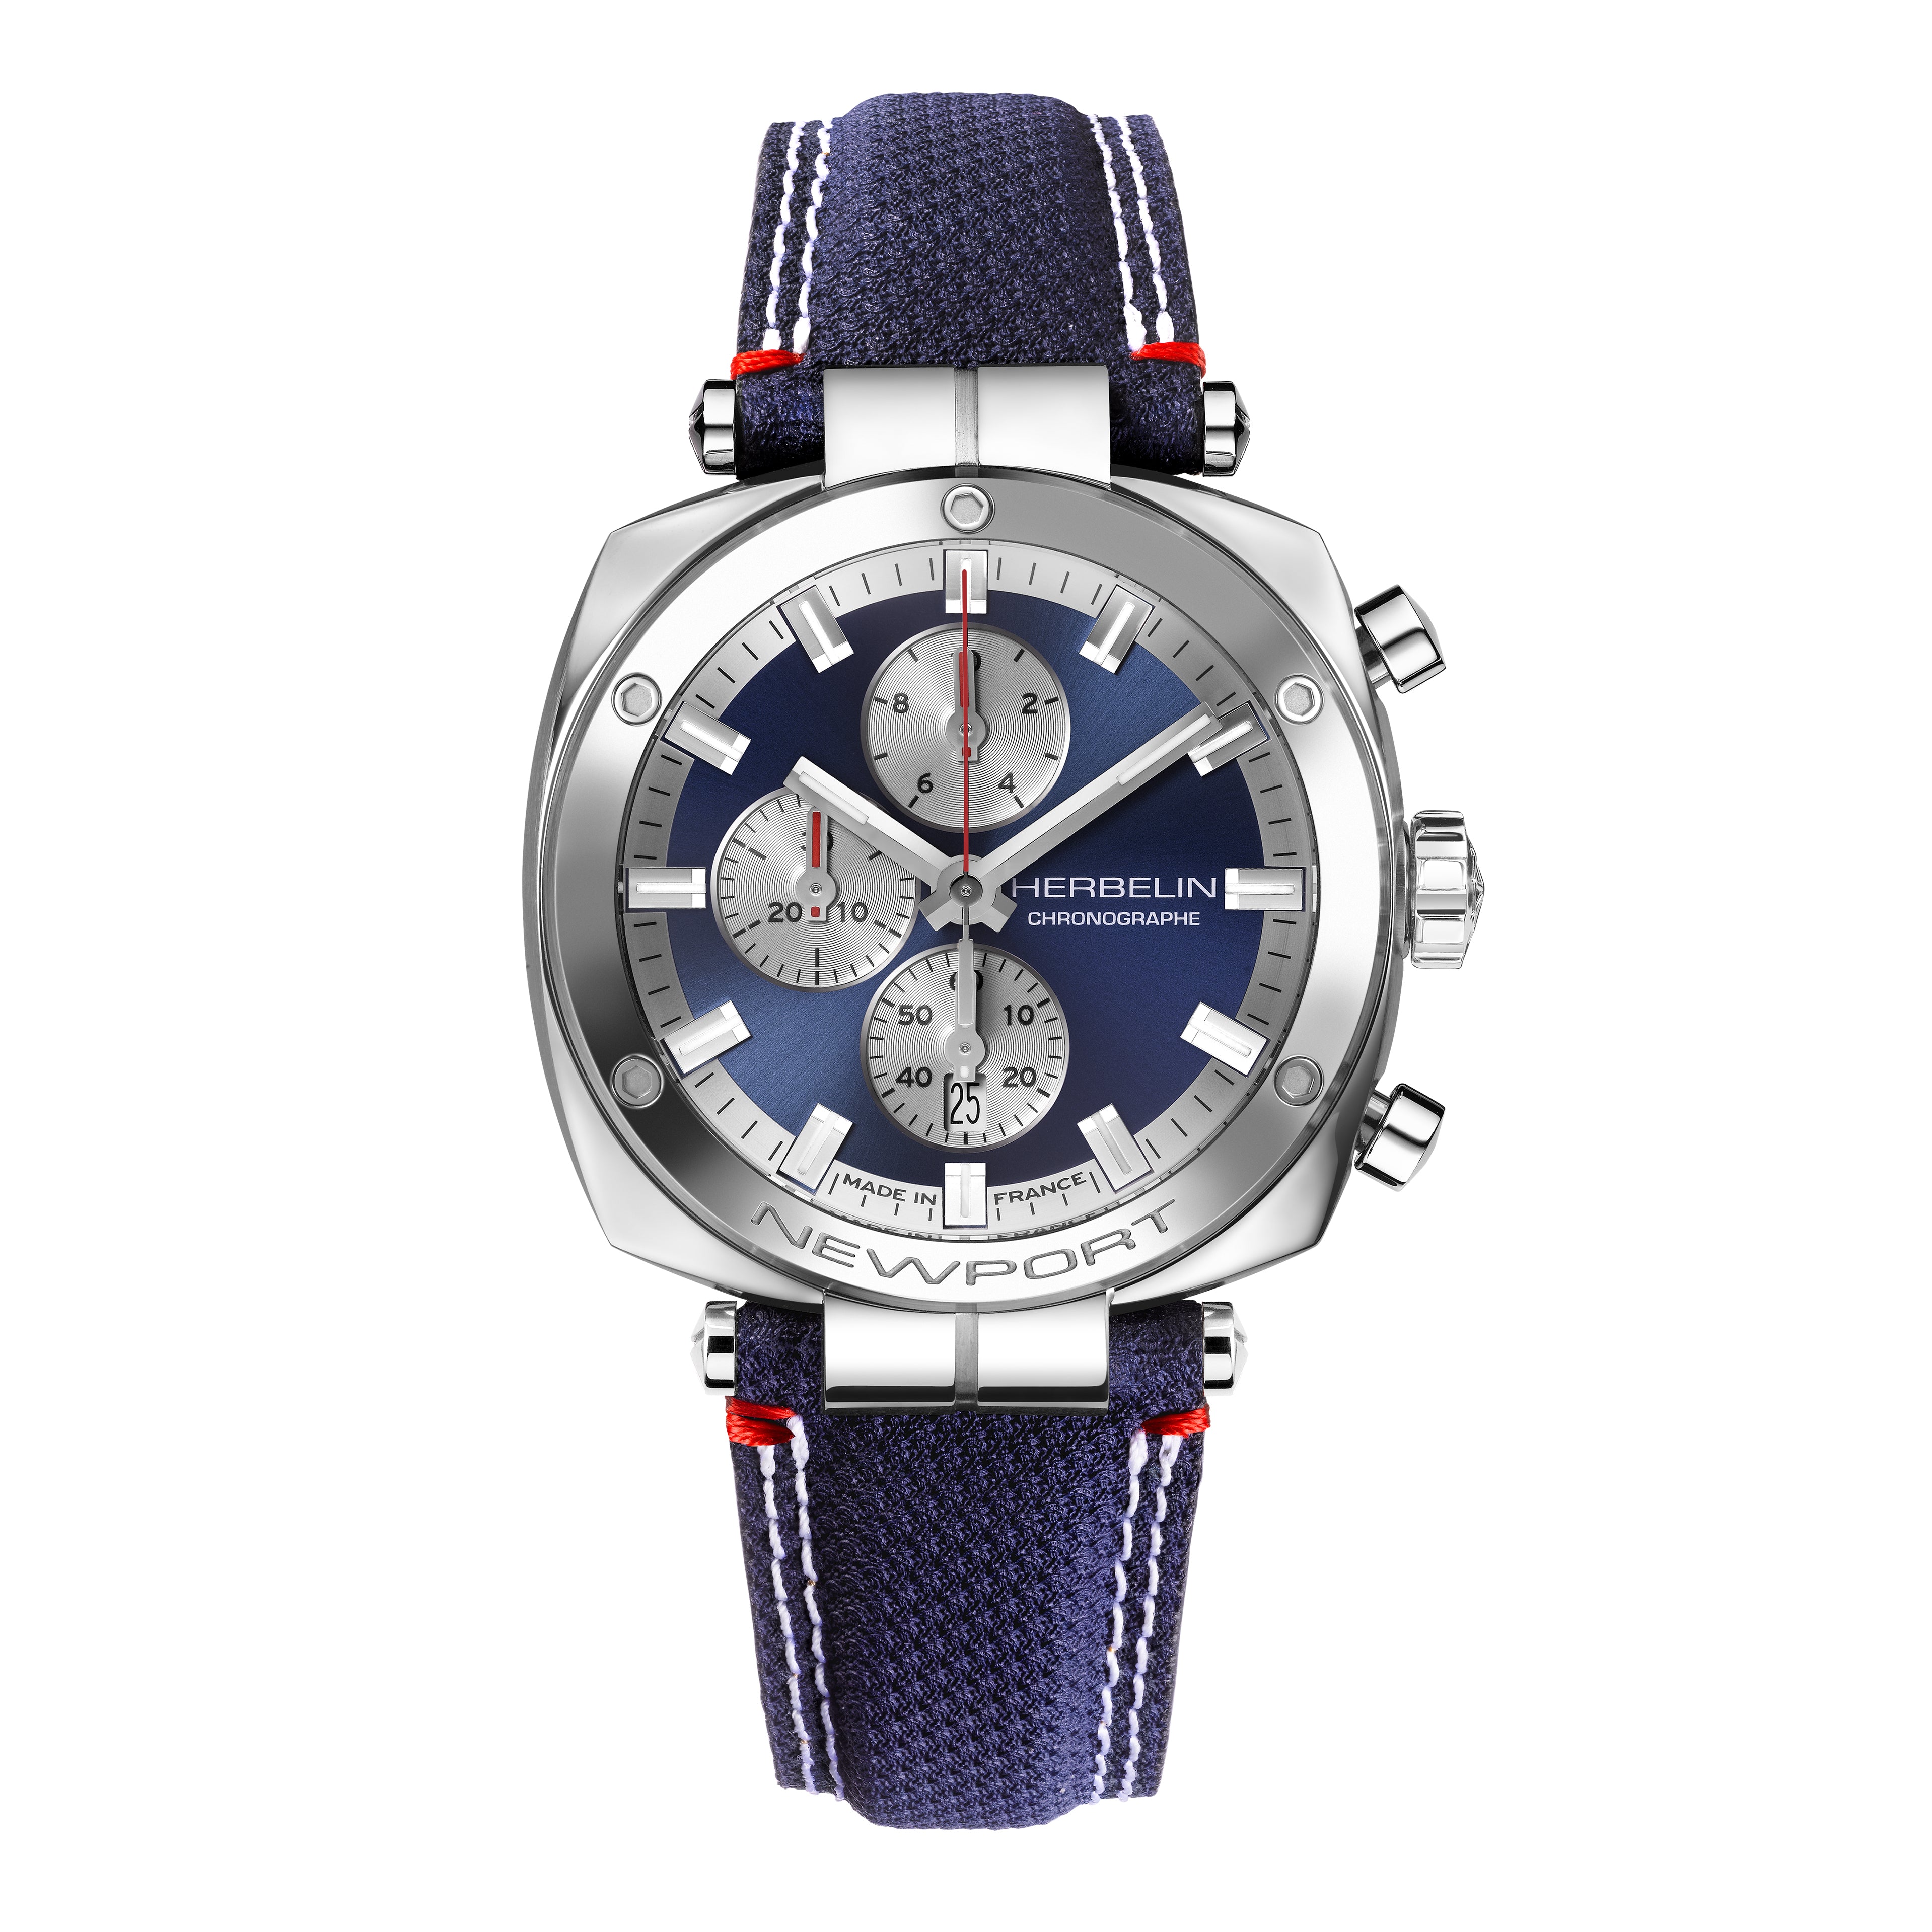 Mens Herbelin Newport Heritage Chronograph Watch on Leather Strap